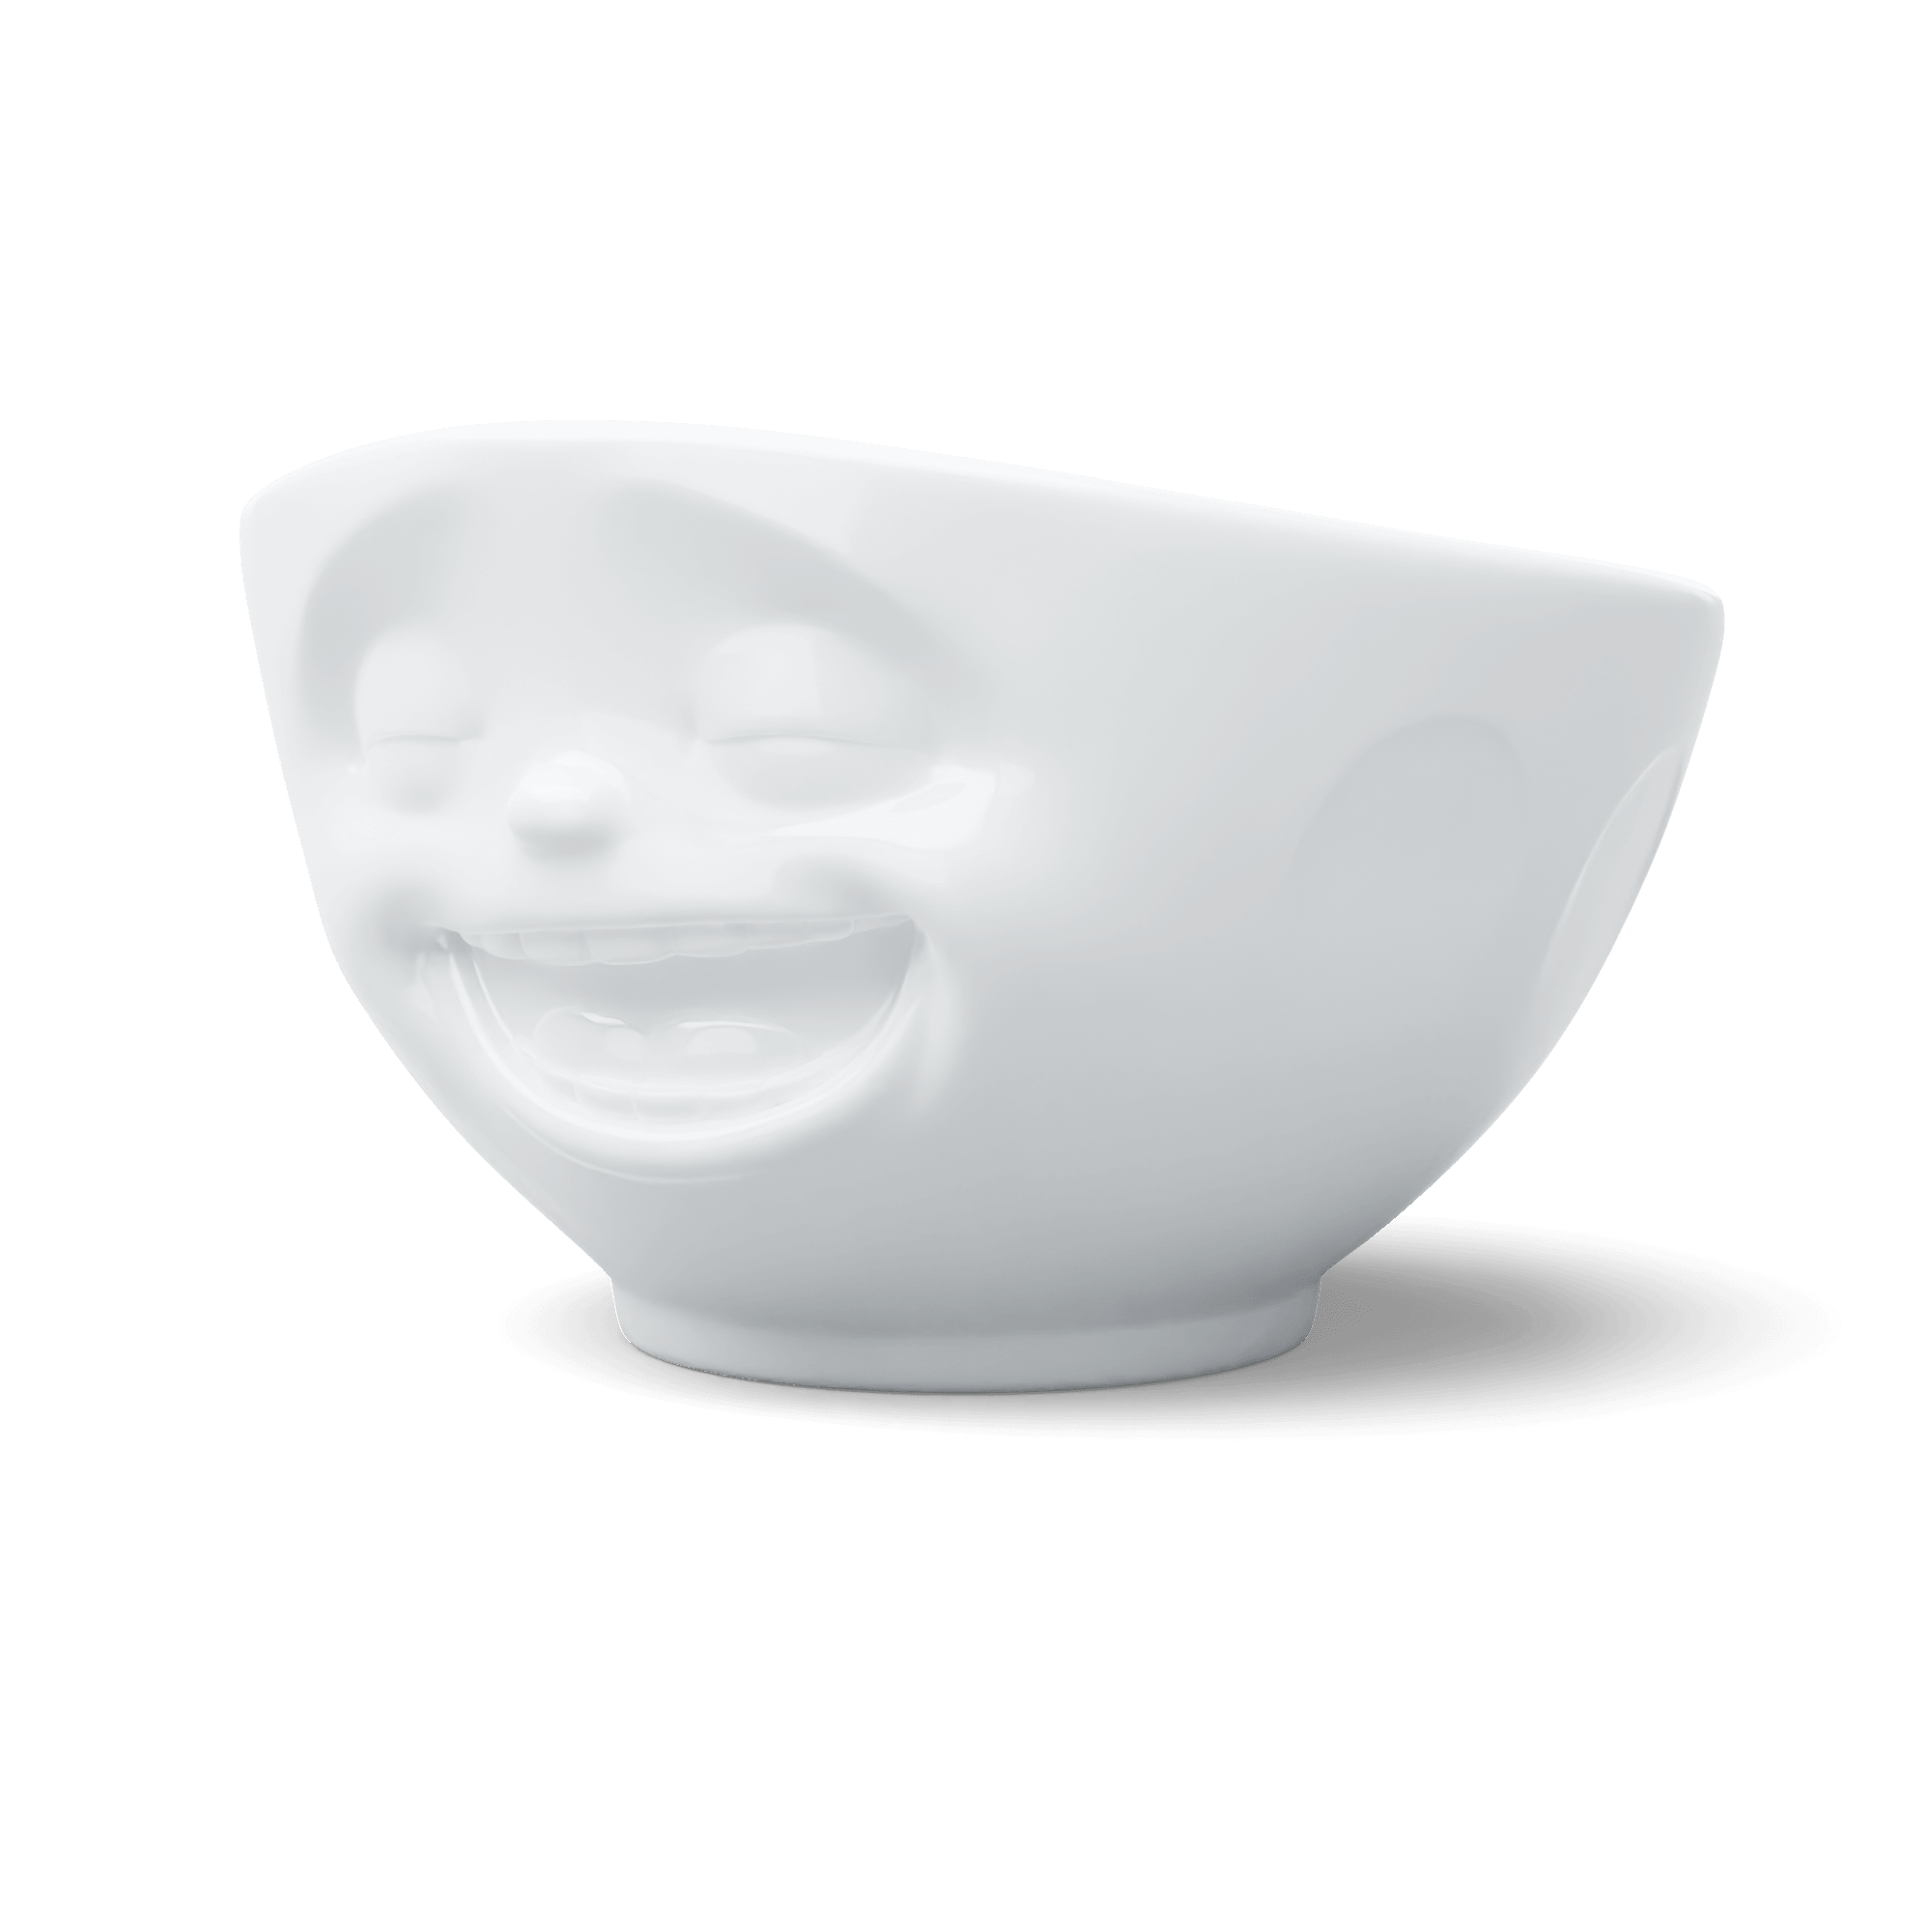 Miska LAUGHING biały 58products    Eye on Design